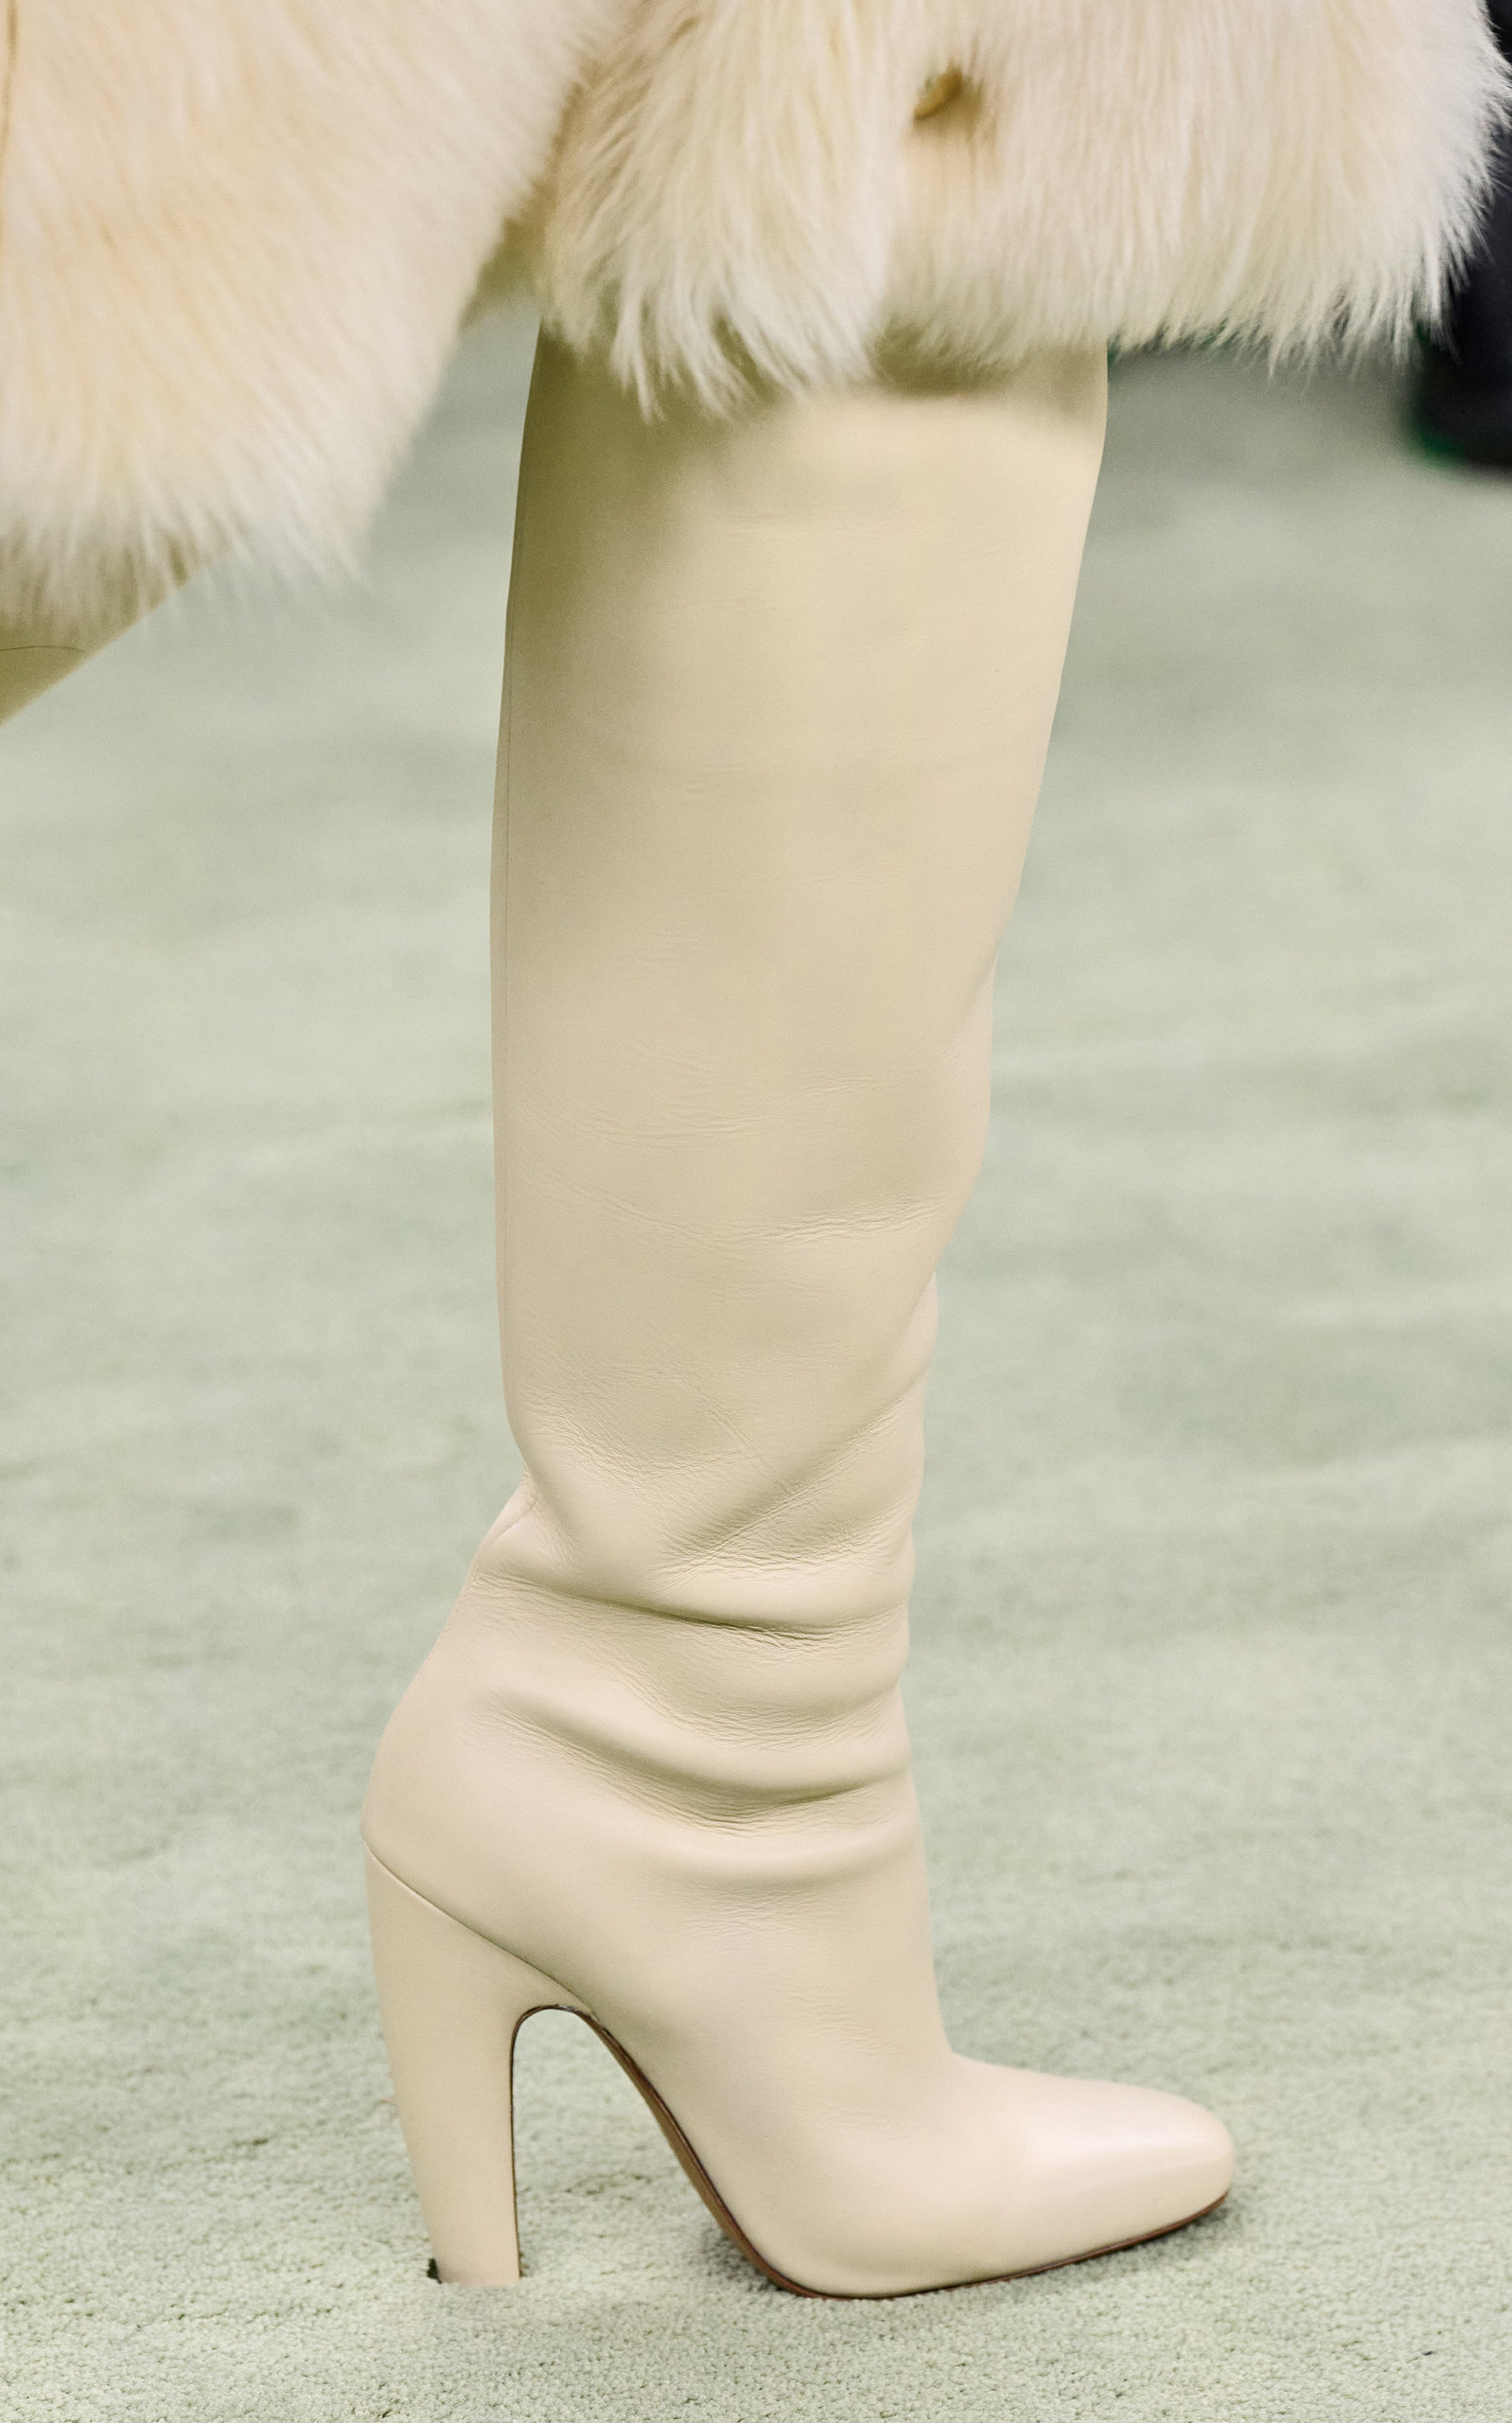 Over-The-Knee Leather High Heel Boots